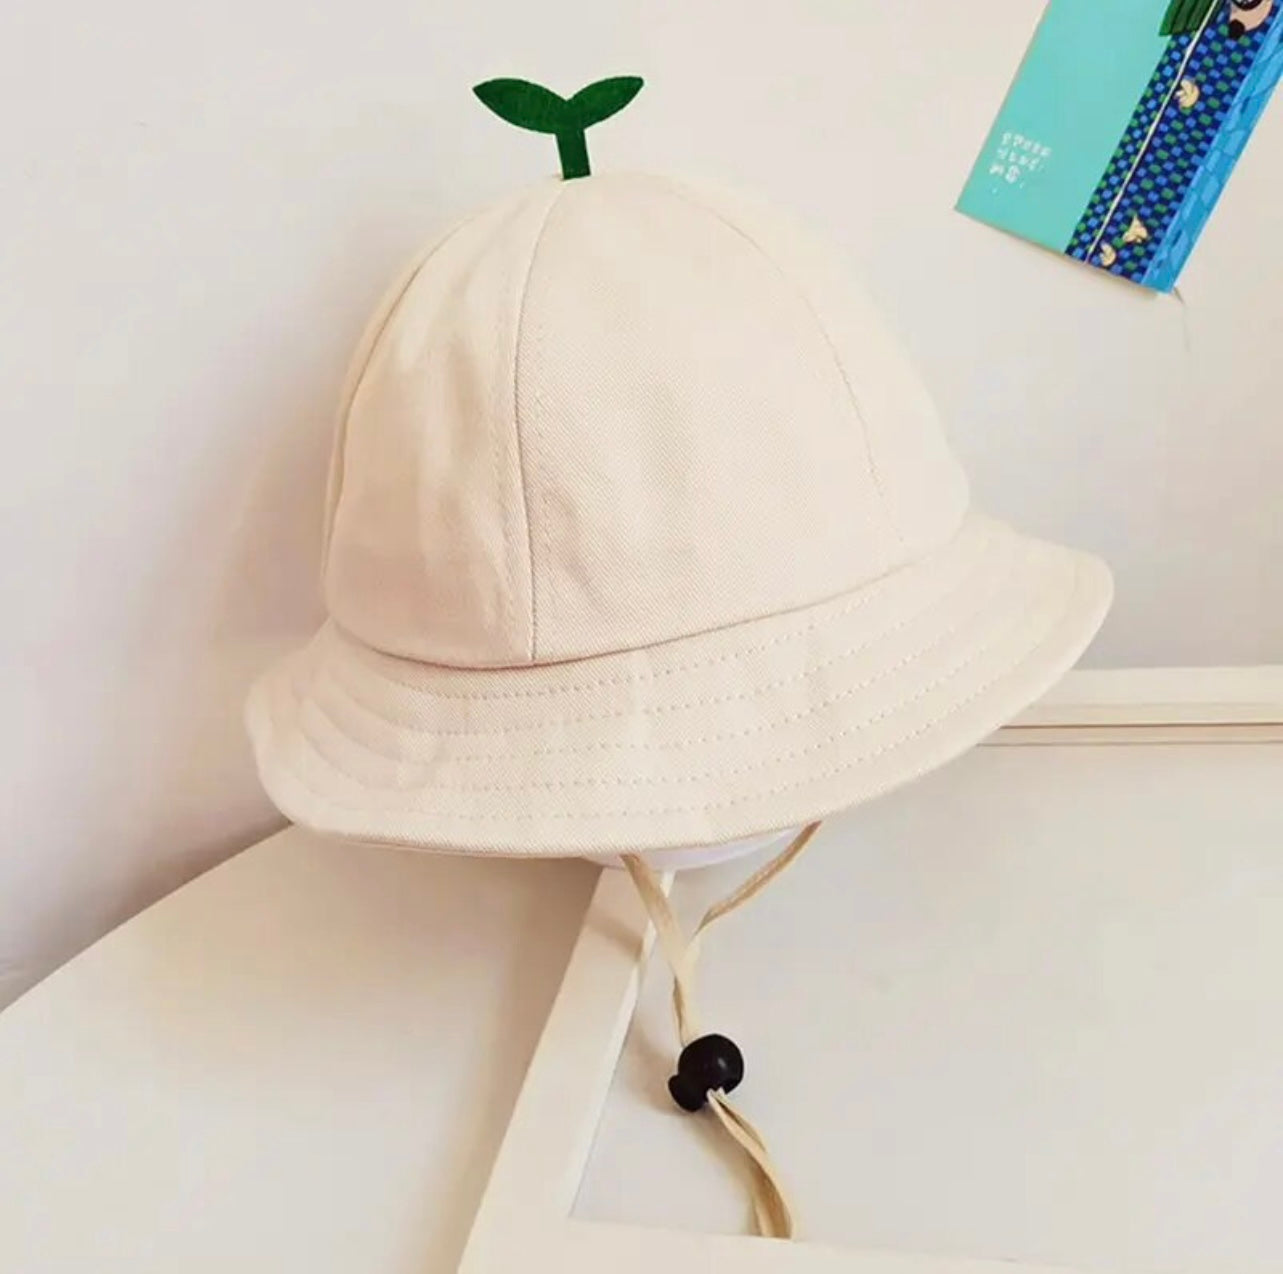 Little sprout Bucket Hat